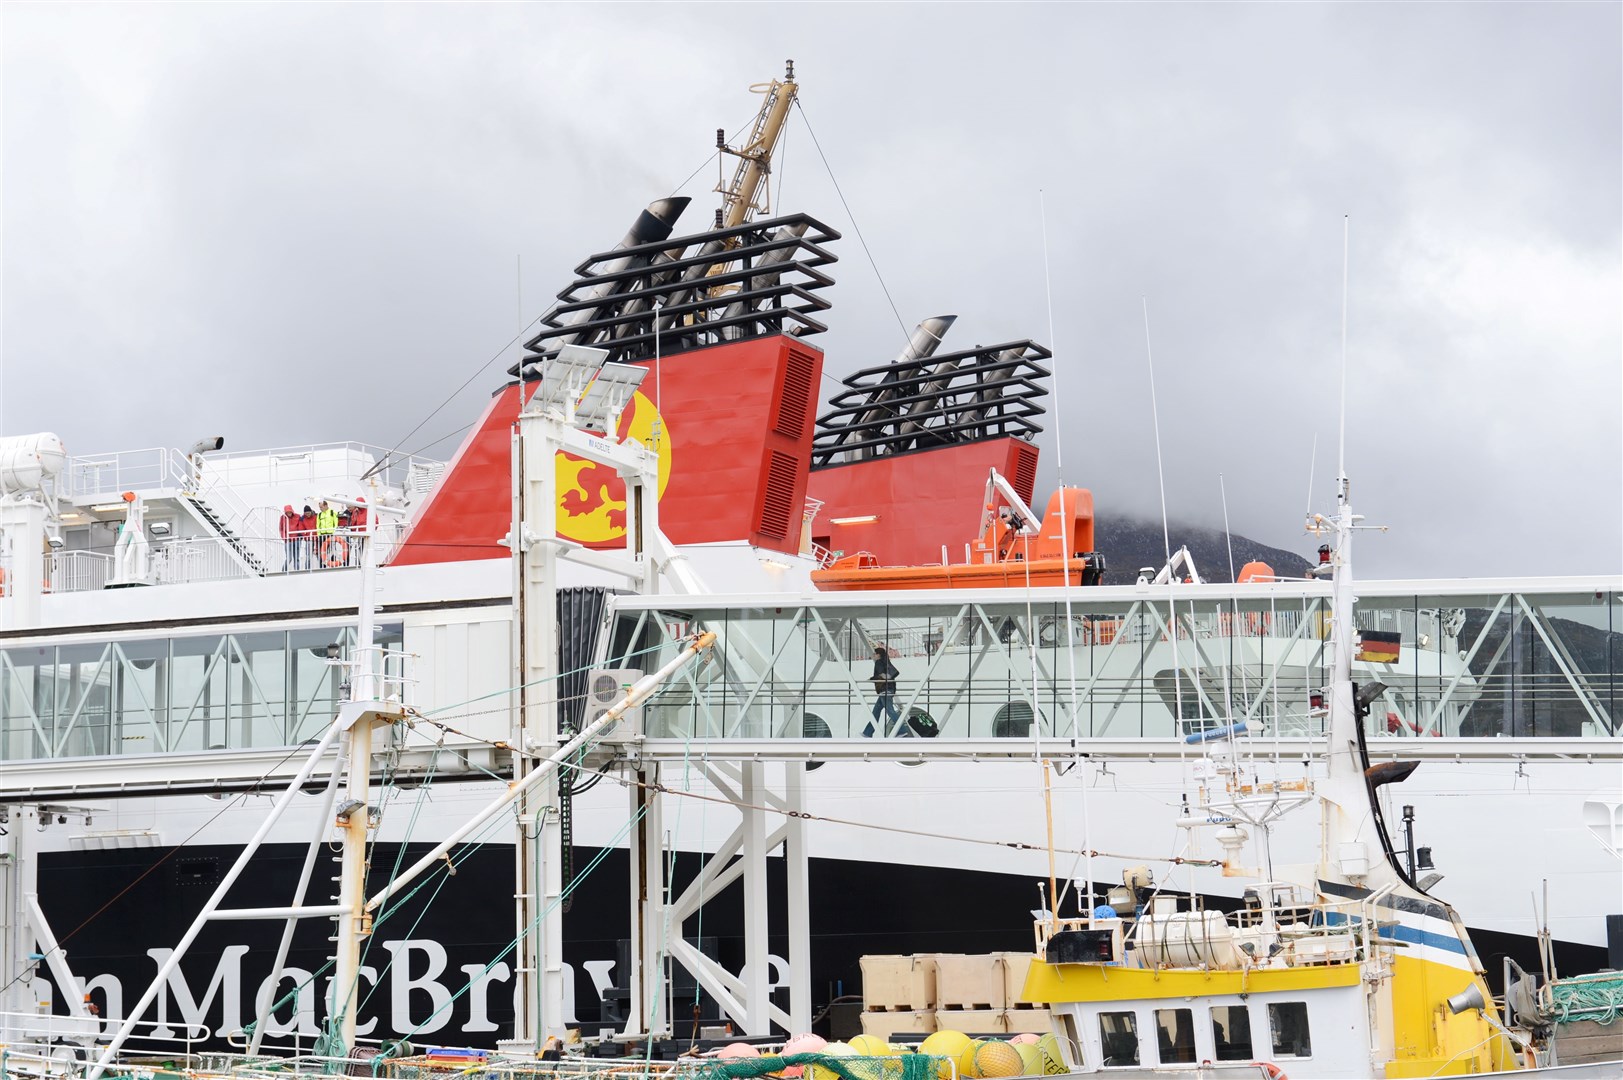 CalMac has cancelled all sailings in and out of Ullapool on Wednesday.